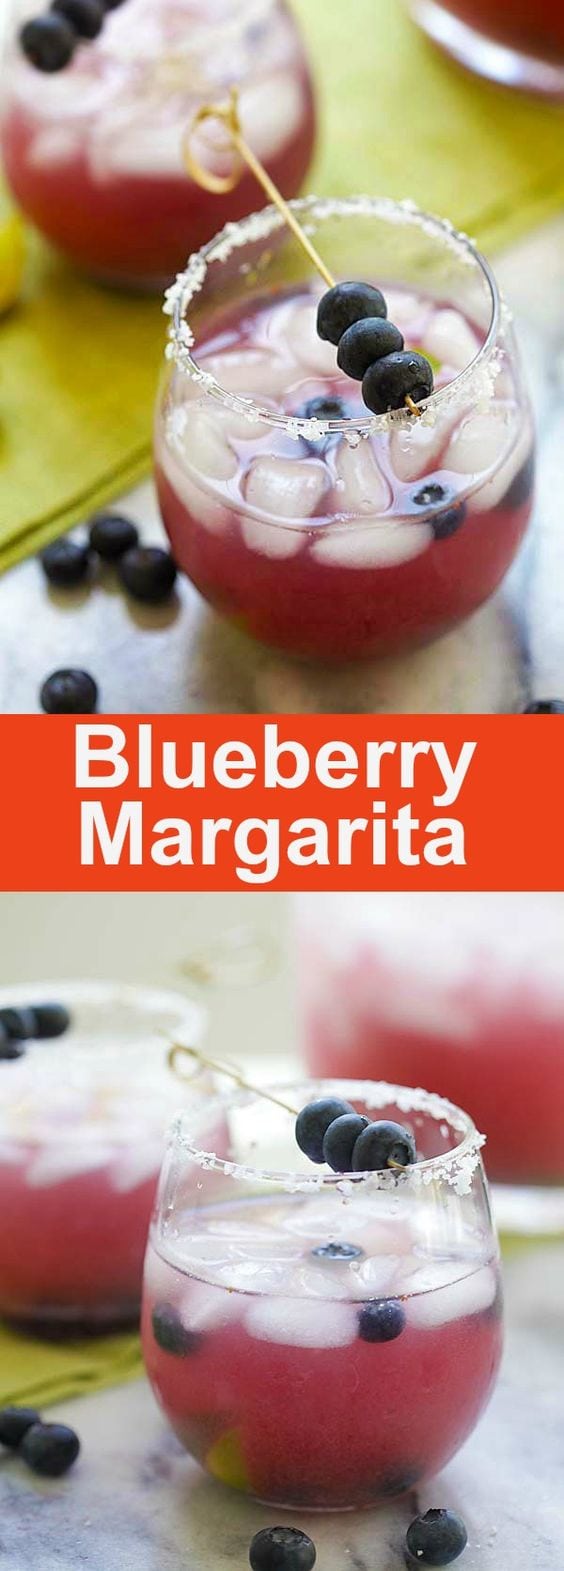 Blueberry Margarita – the booziest blueberry margarita recipe with silver tequila and blueberries. Party is on with this quick and easy recipe | rasamalaysia.com